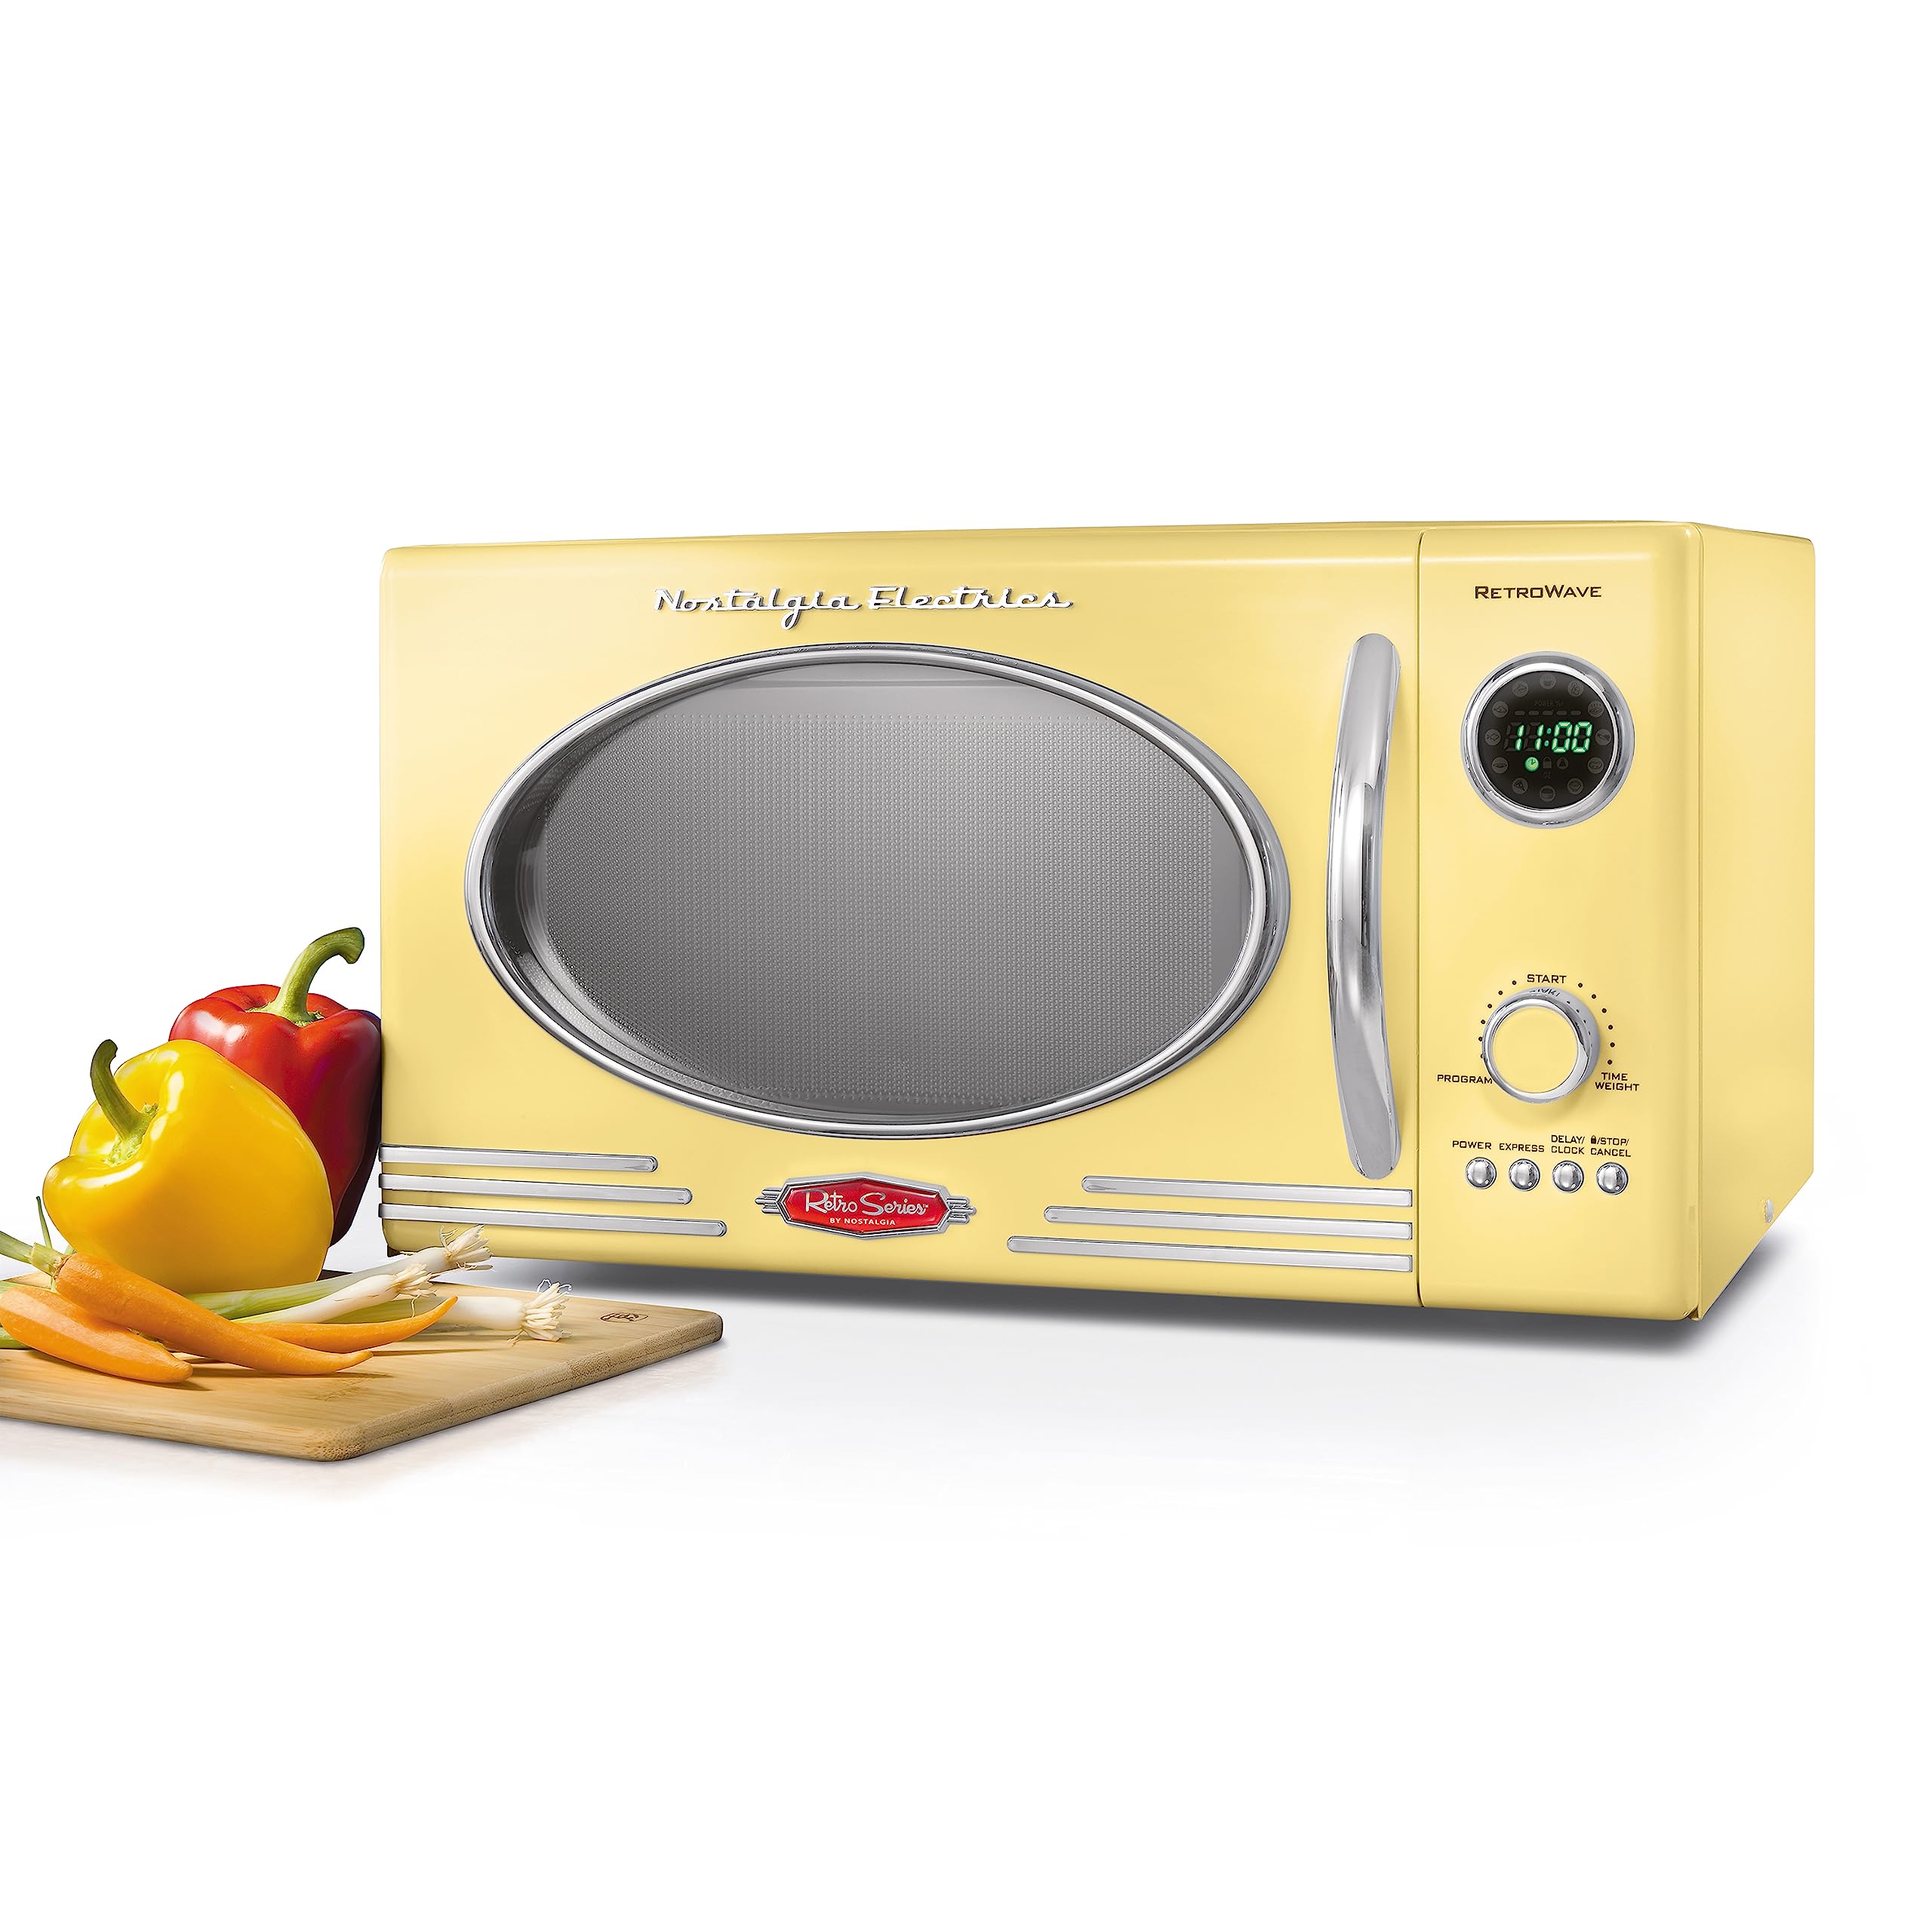 Nostalgia Retro Microwave - Countertop Microwave Oven - Includes 12 Pre-Programmed Settings and Digital Clock - 0.9 CU Ft. - 800 Watts - Yellow